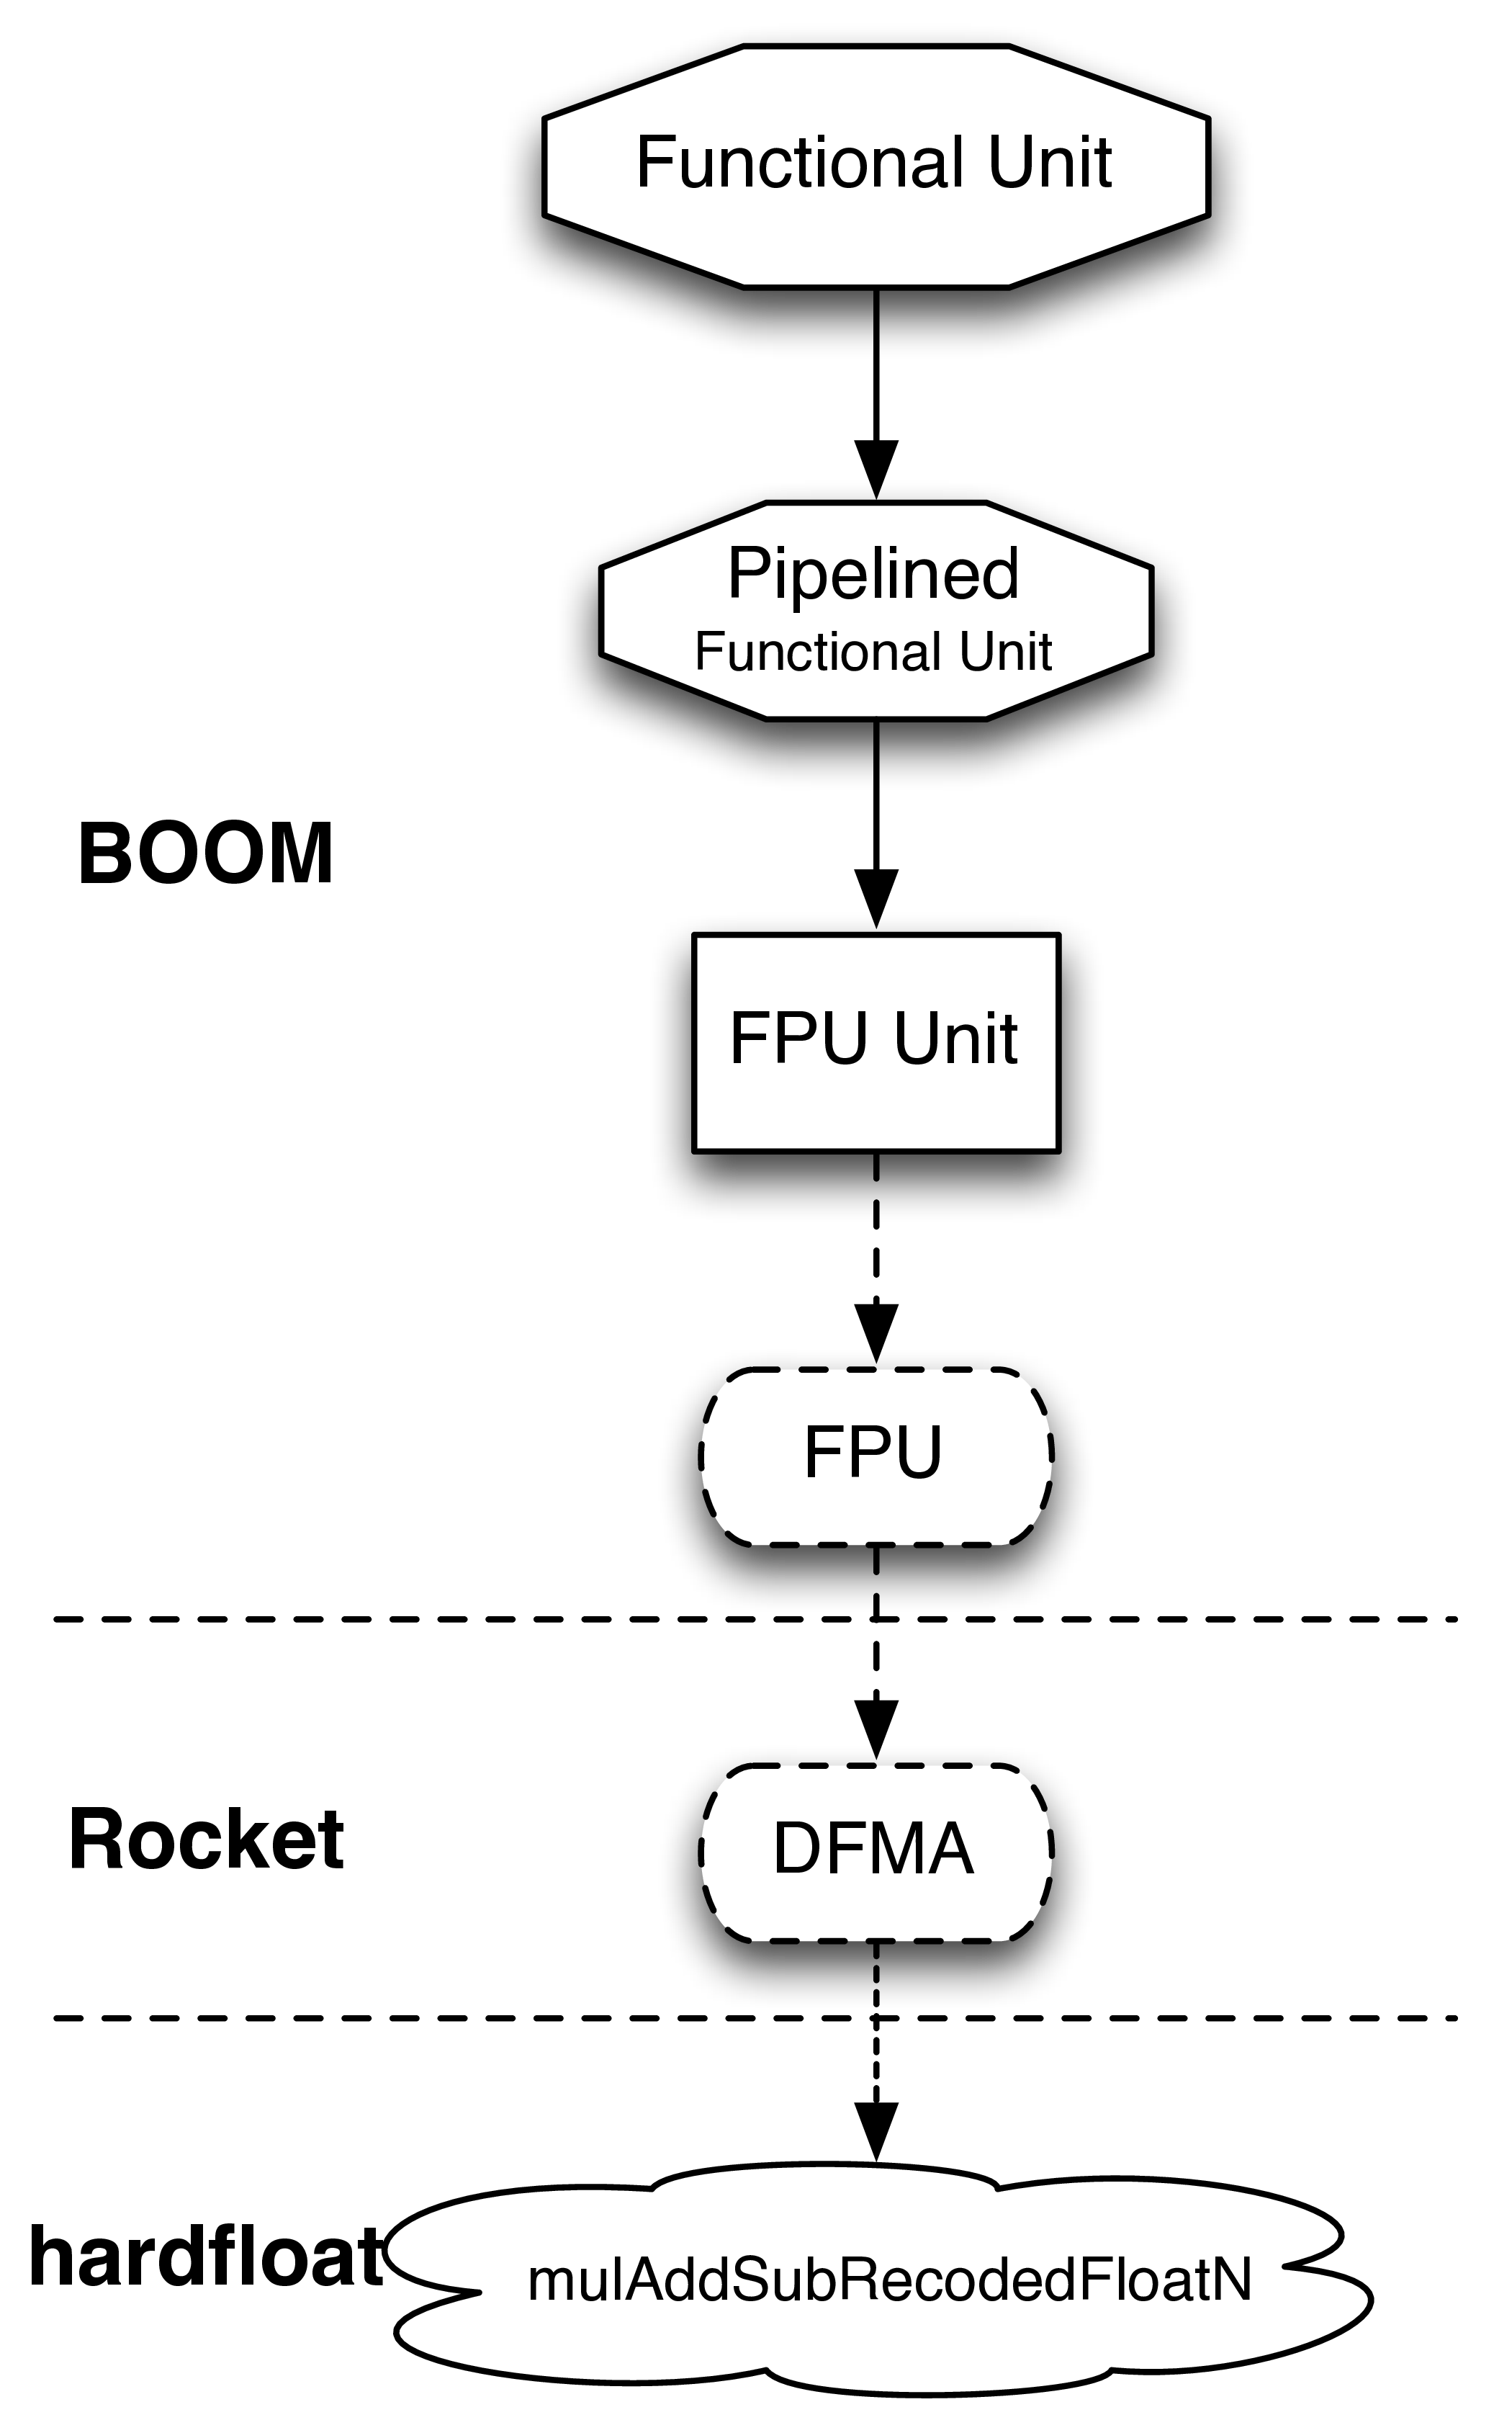 Functional Unit for FPU